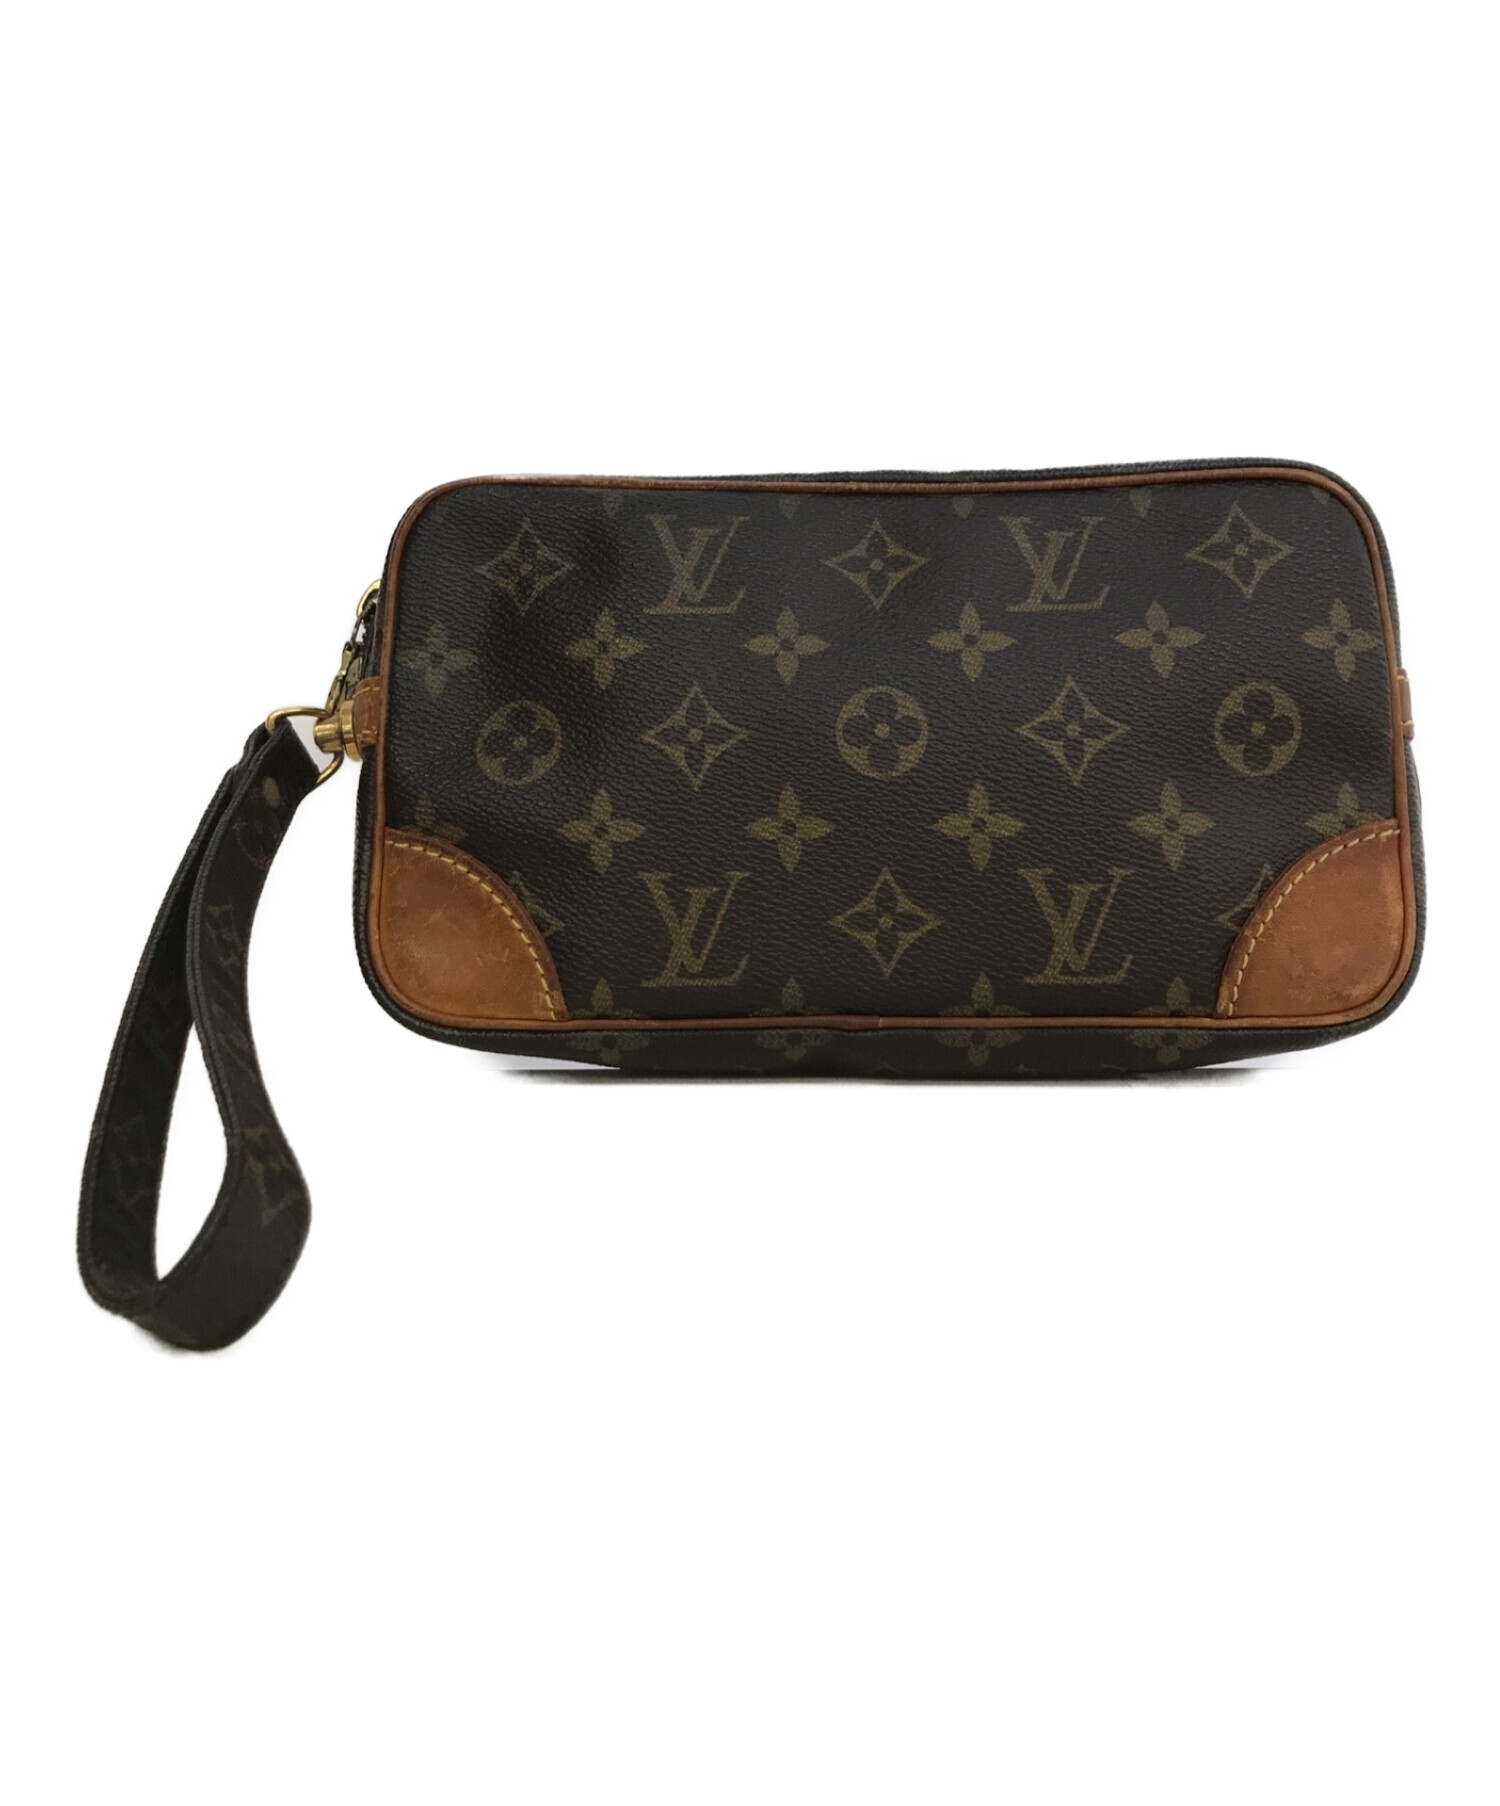 LOUIS VUITTON ルイヴィトン クラッチバッグ - 茶(総柄)